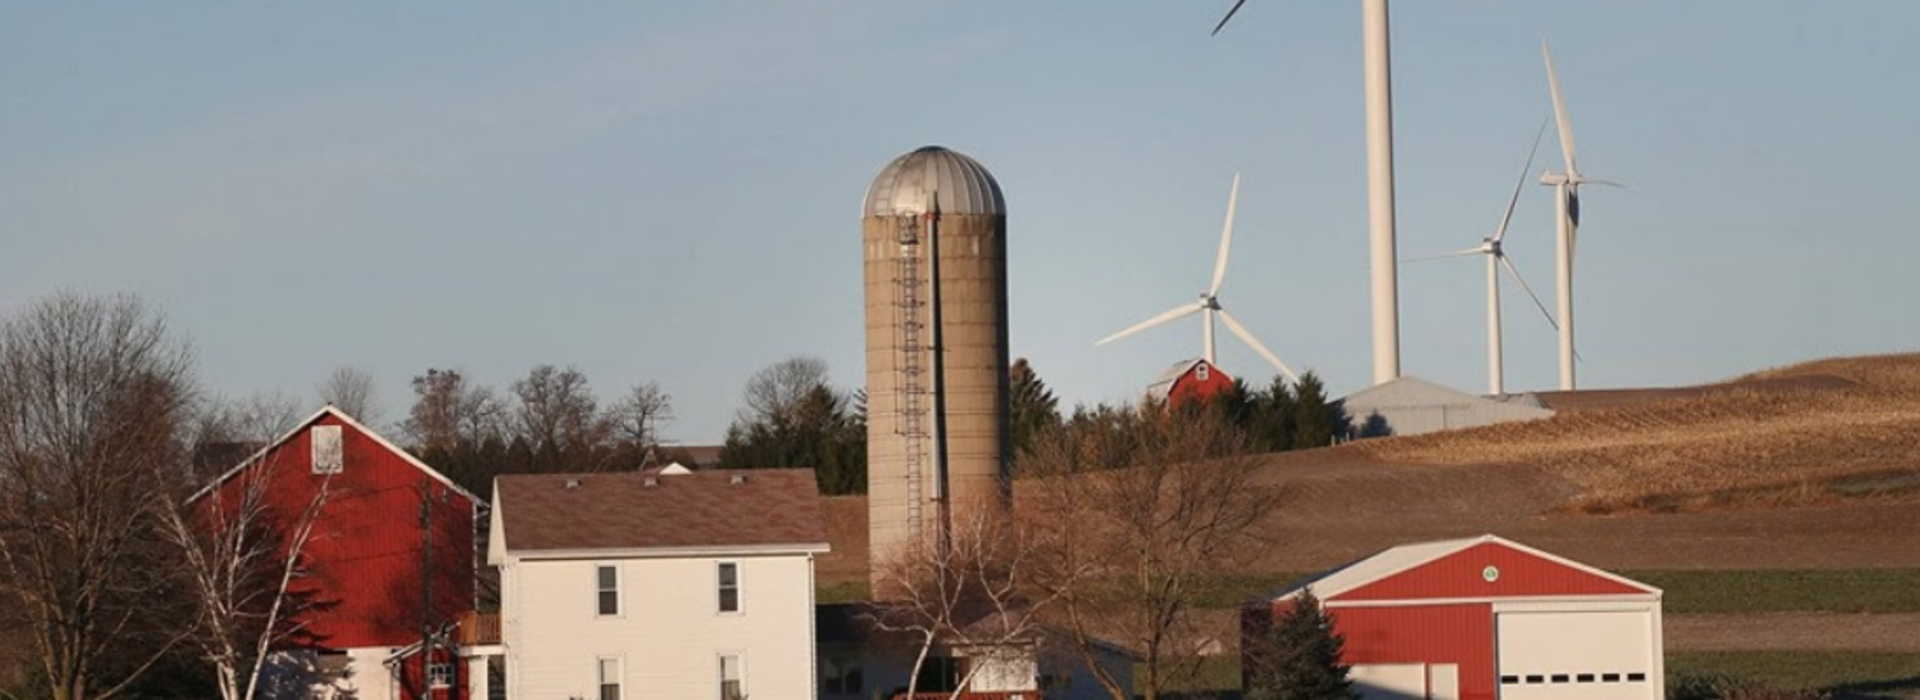 MIDDLETON, WI - NOVEMBER 19: Wind turbines rise up above farmland on the outskirts of the state capital on November 19, 2013 near Middleton, Wisconsin. A